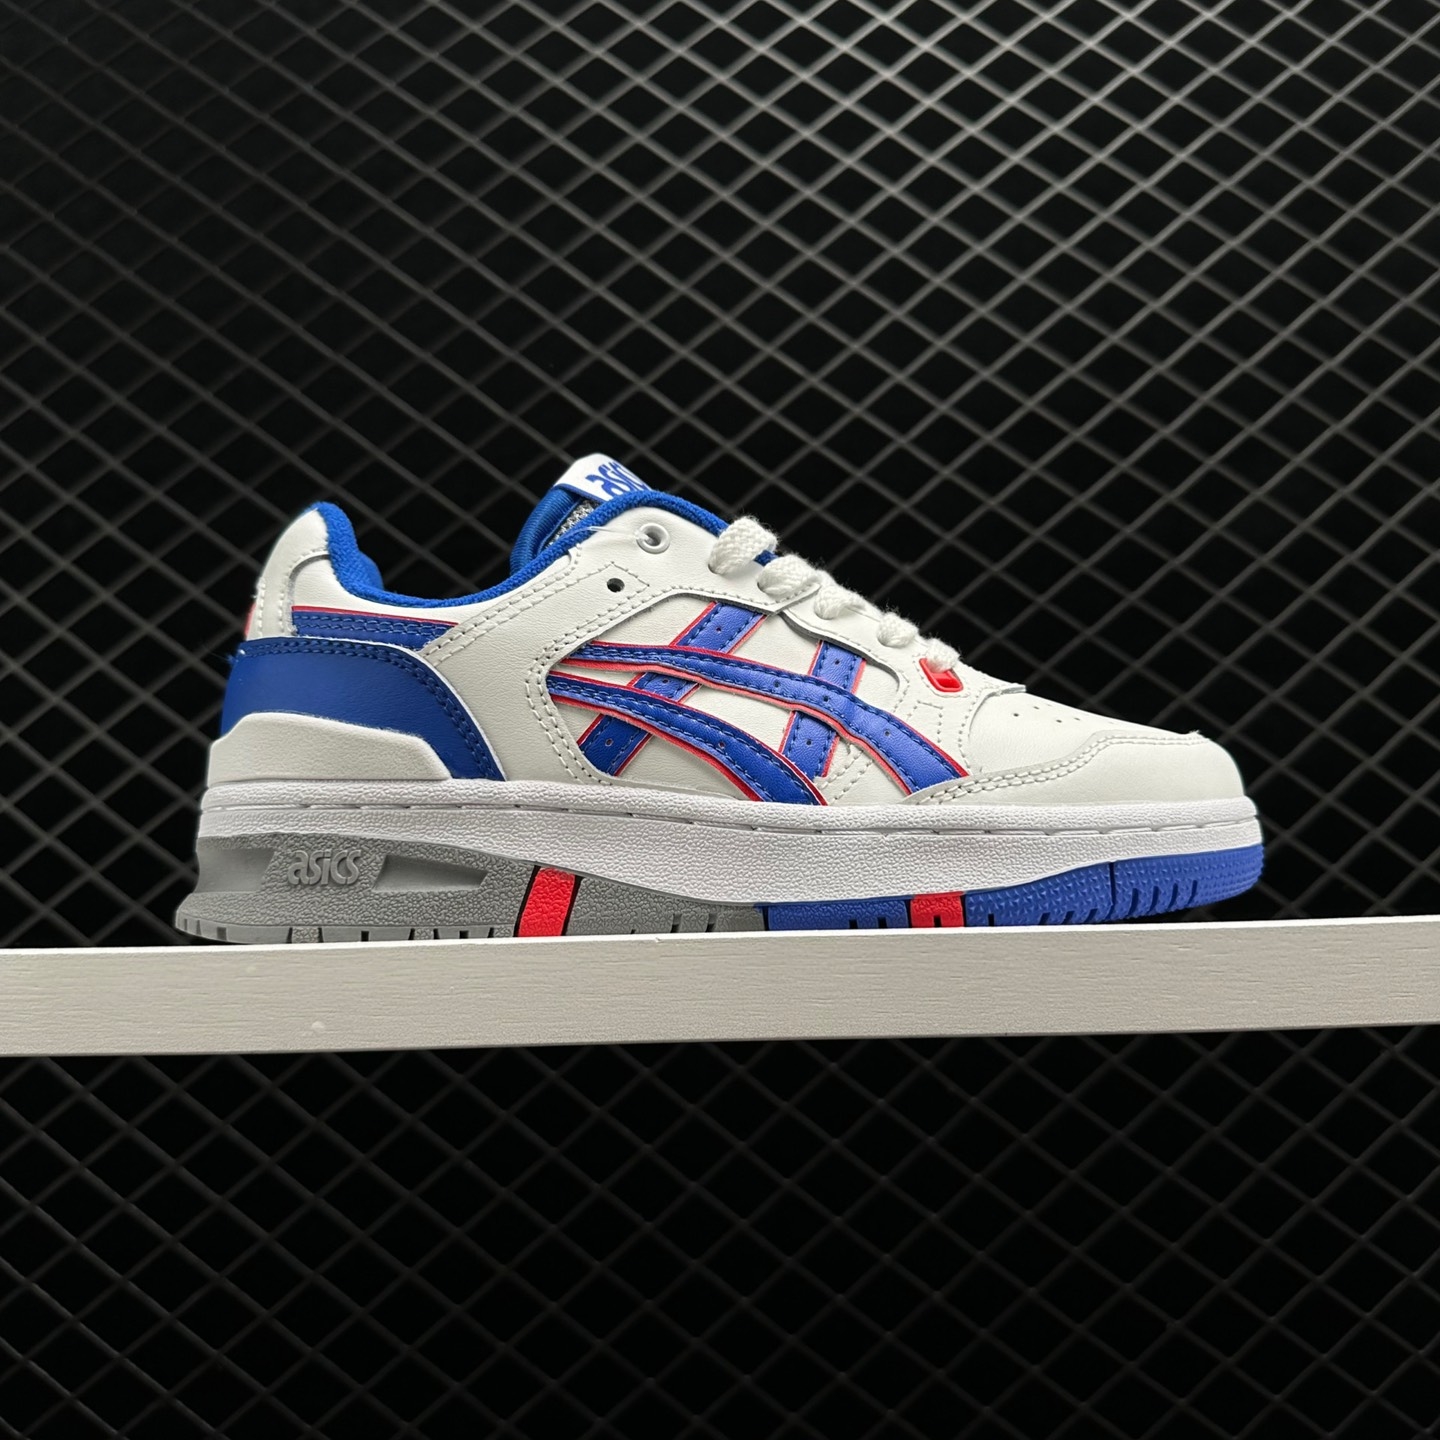 Asics EX89 'Knicks' 1201A476-101 | Authentic Retro Sneakers